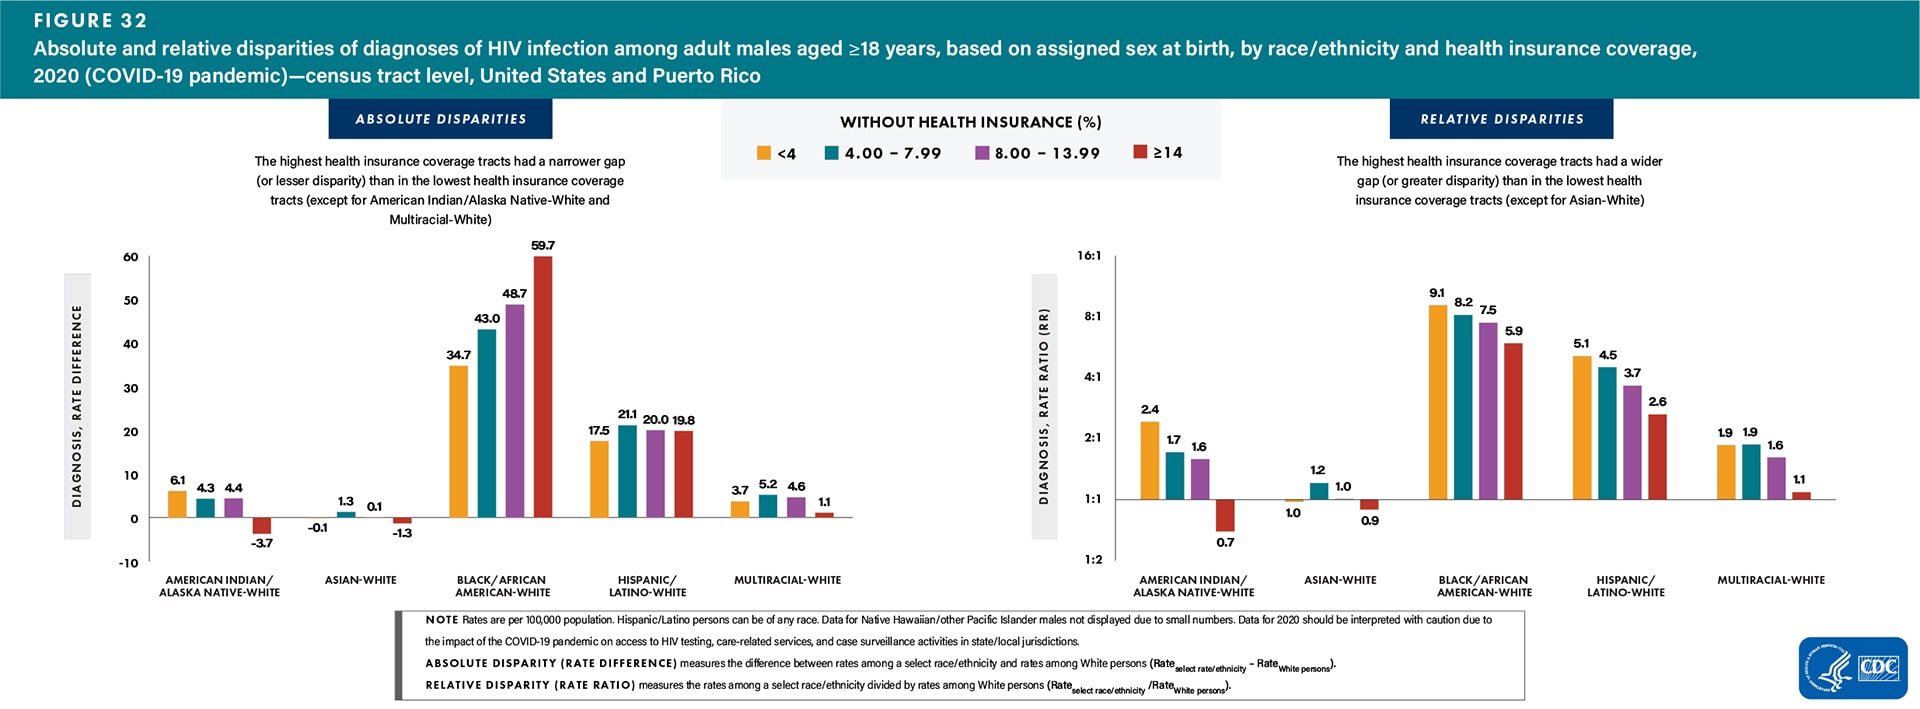 For absolute disparities, the highest health insurance coverage tracts had a narrower gap (or lesser disparity) than in the lowest health insurance coverage tracts (except for American Indian/Alaska Native-White and multiracial-White). For relative disparities, the highest health insurance coverage tracts had a wider gap (or greater disparity) than in the lowest health insurance coverage tracts (except for Asian-White).